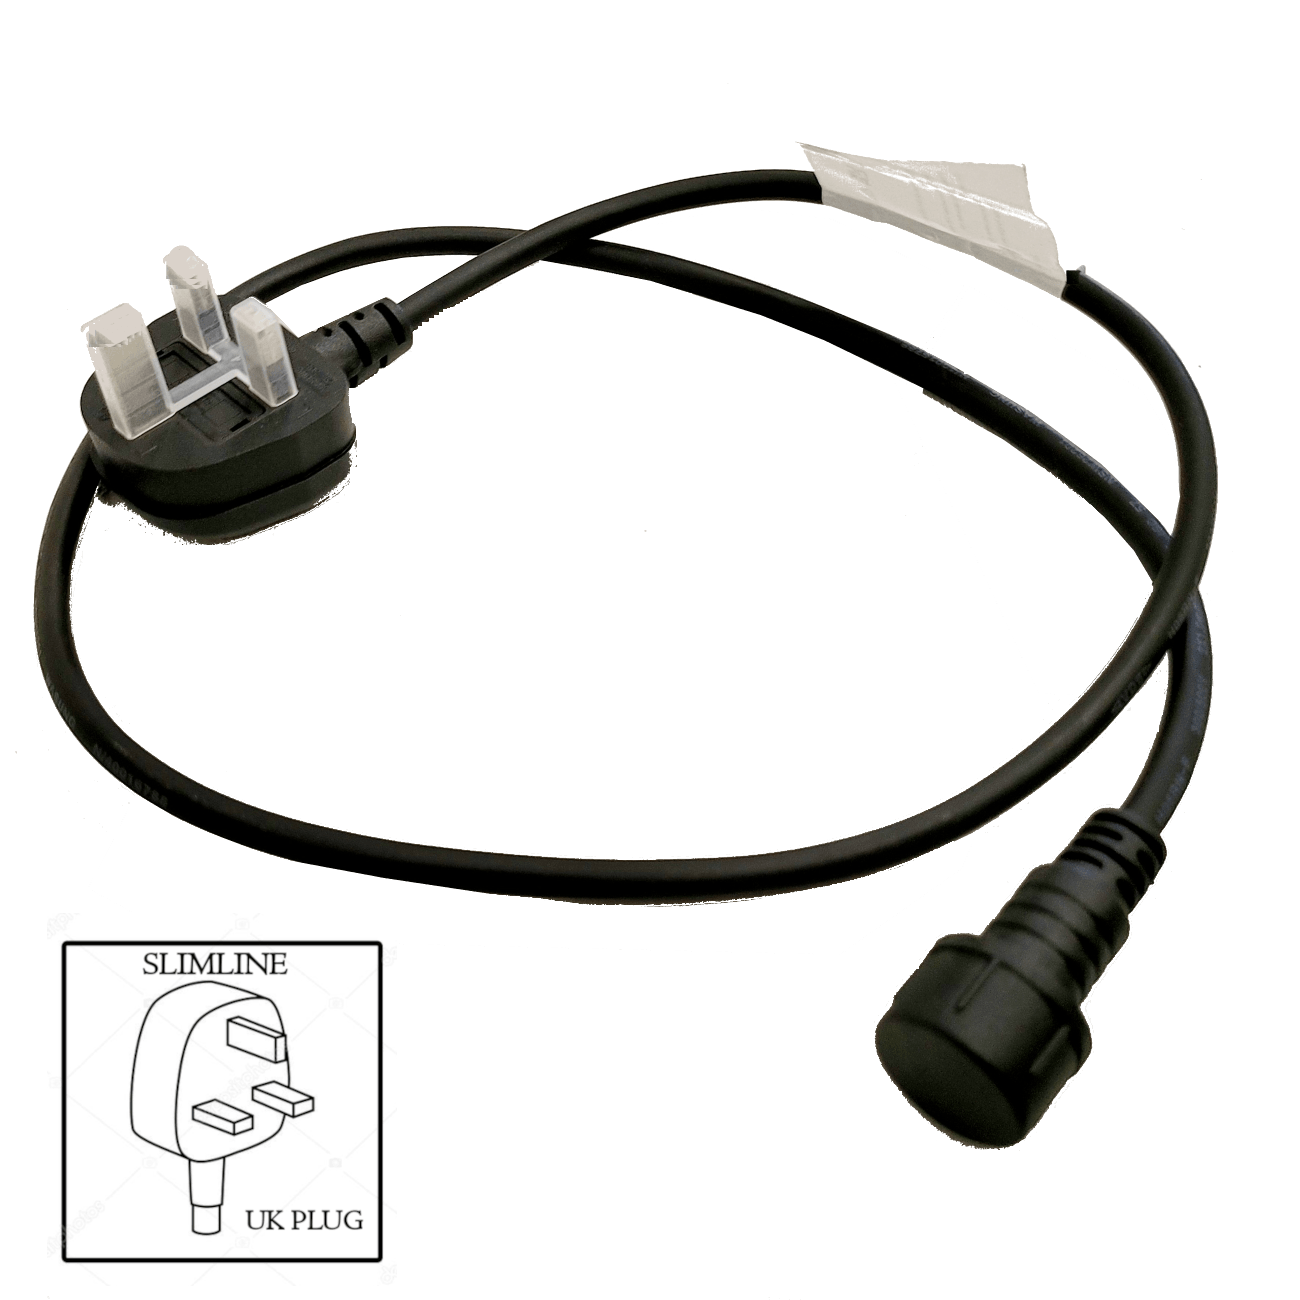 Replacement UK Plug Section & End Cap for Heavy Duty String Lights - Lighting Legends